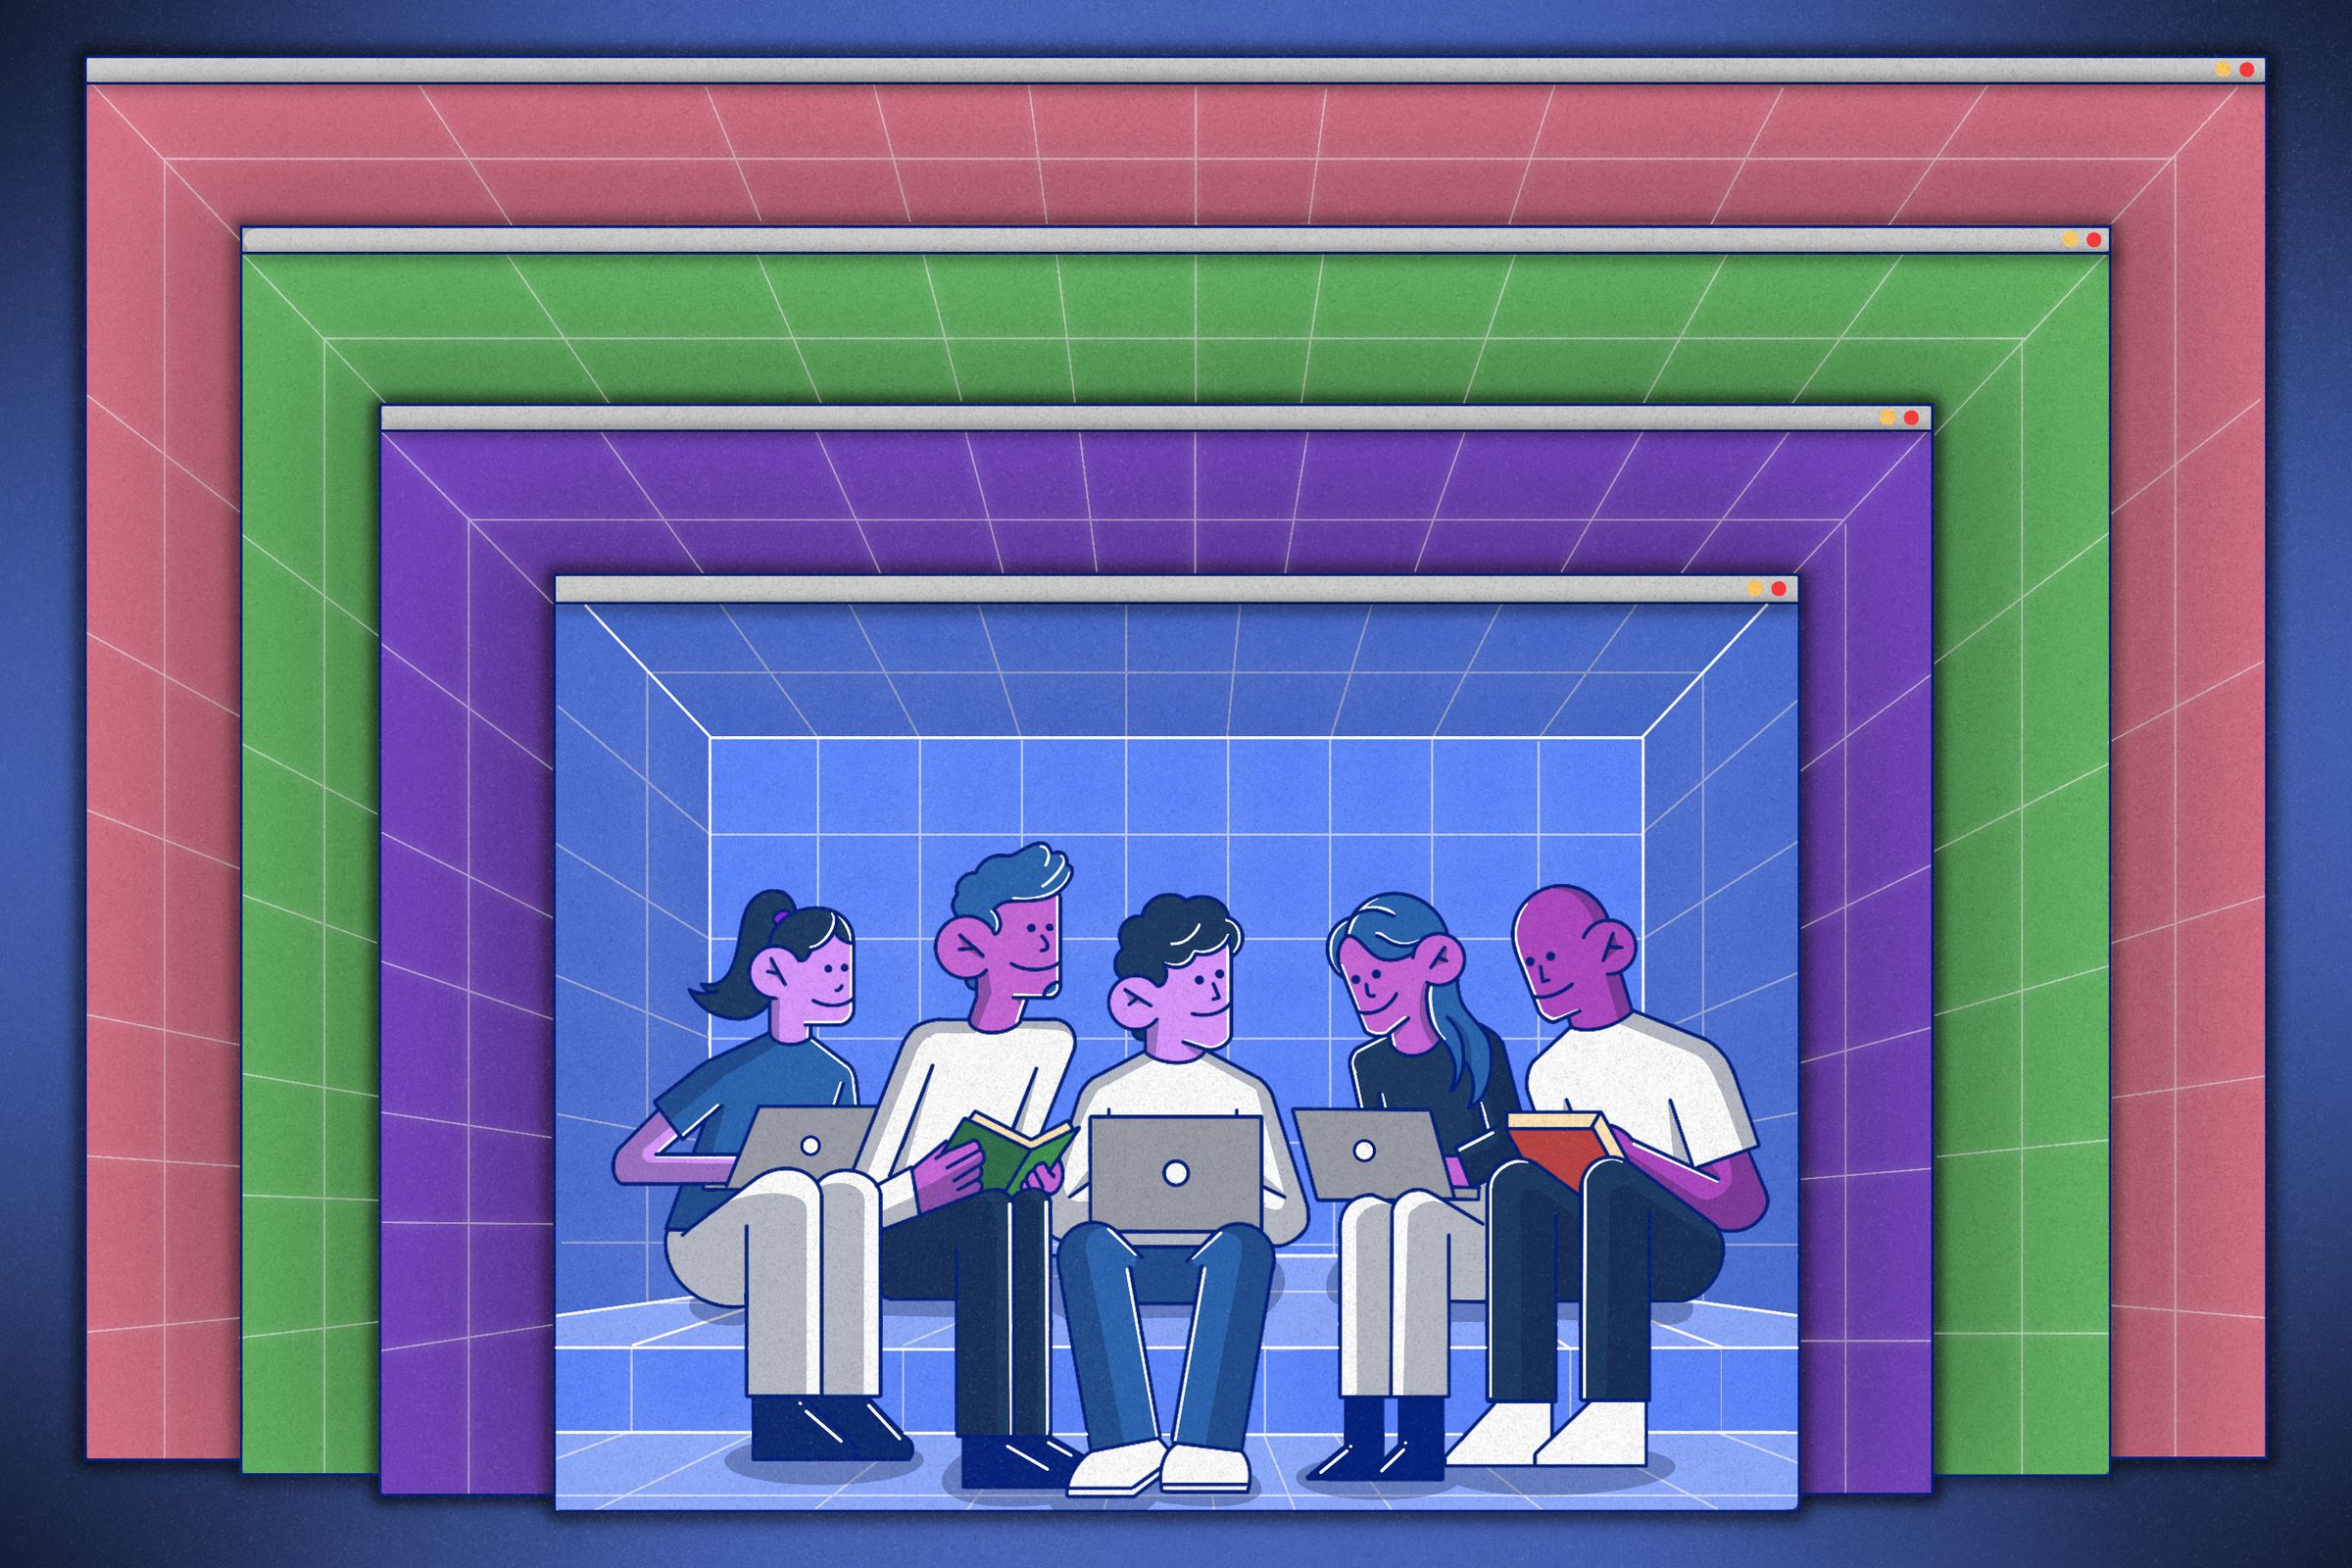 Illustration of five people sitting together on their laptops